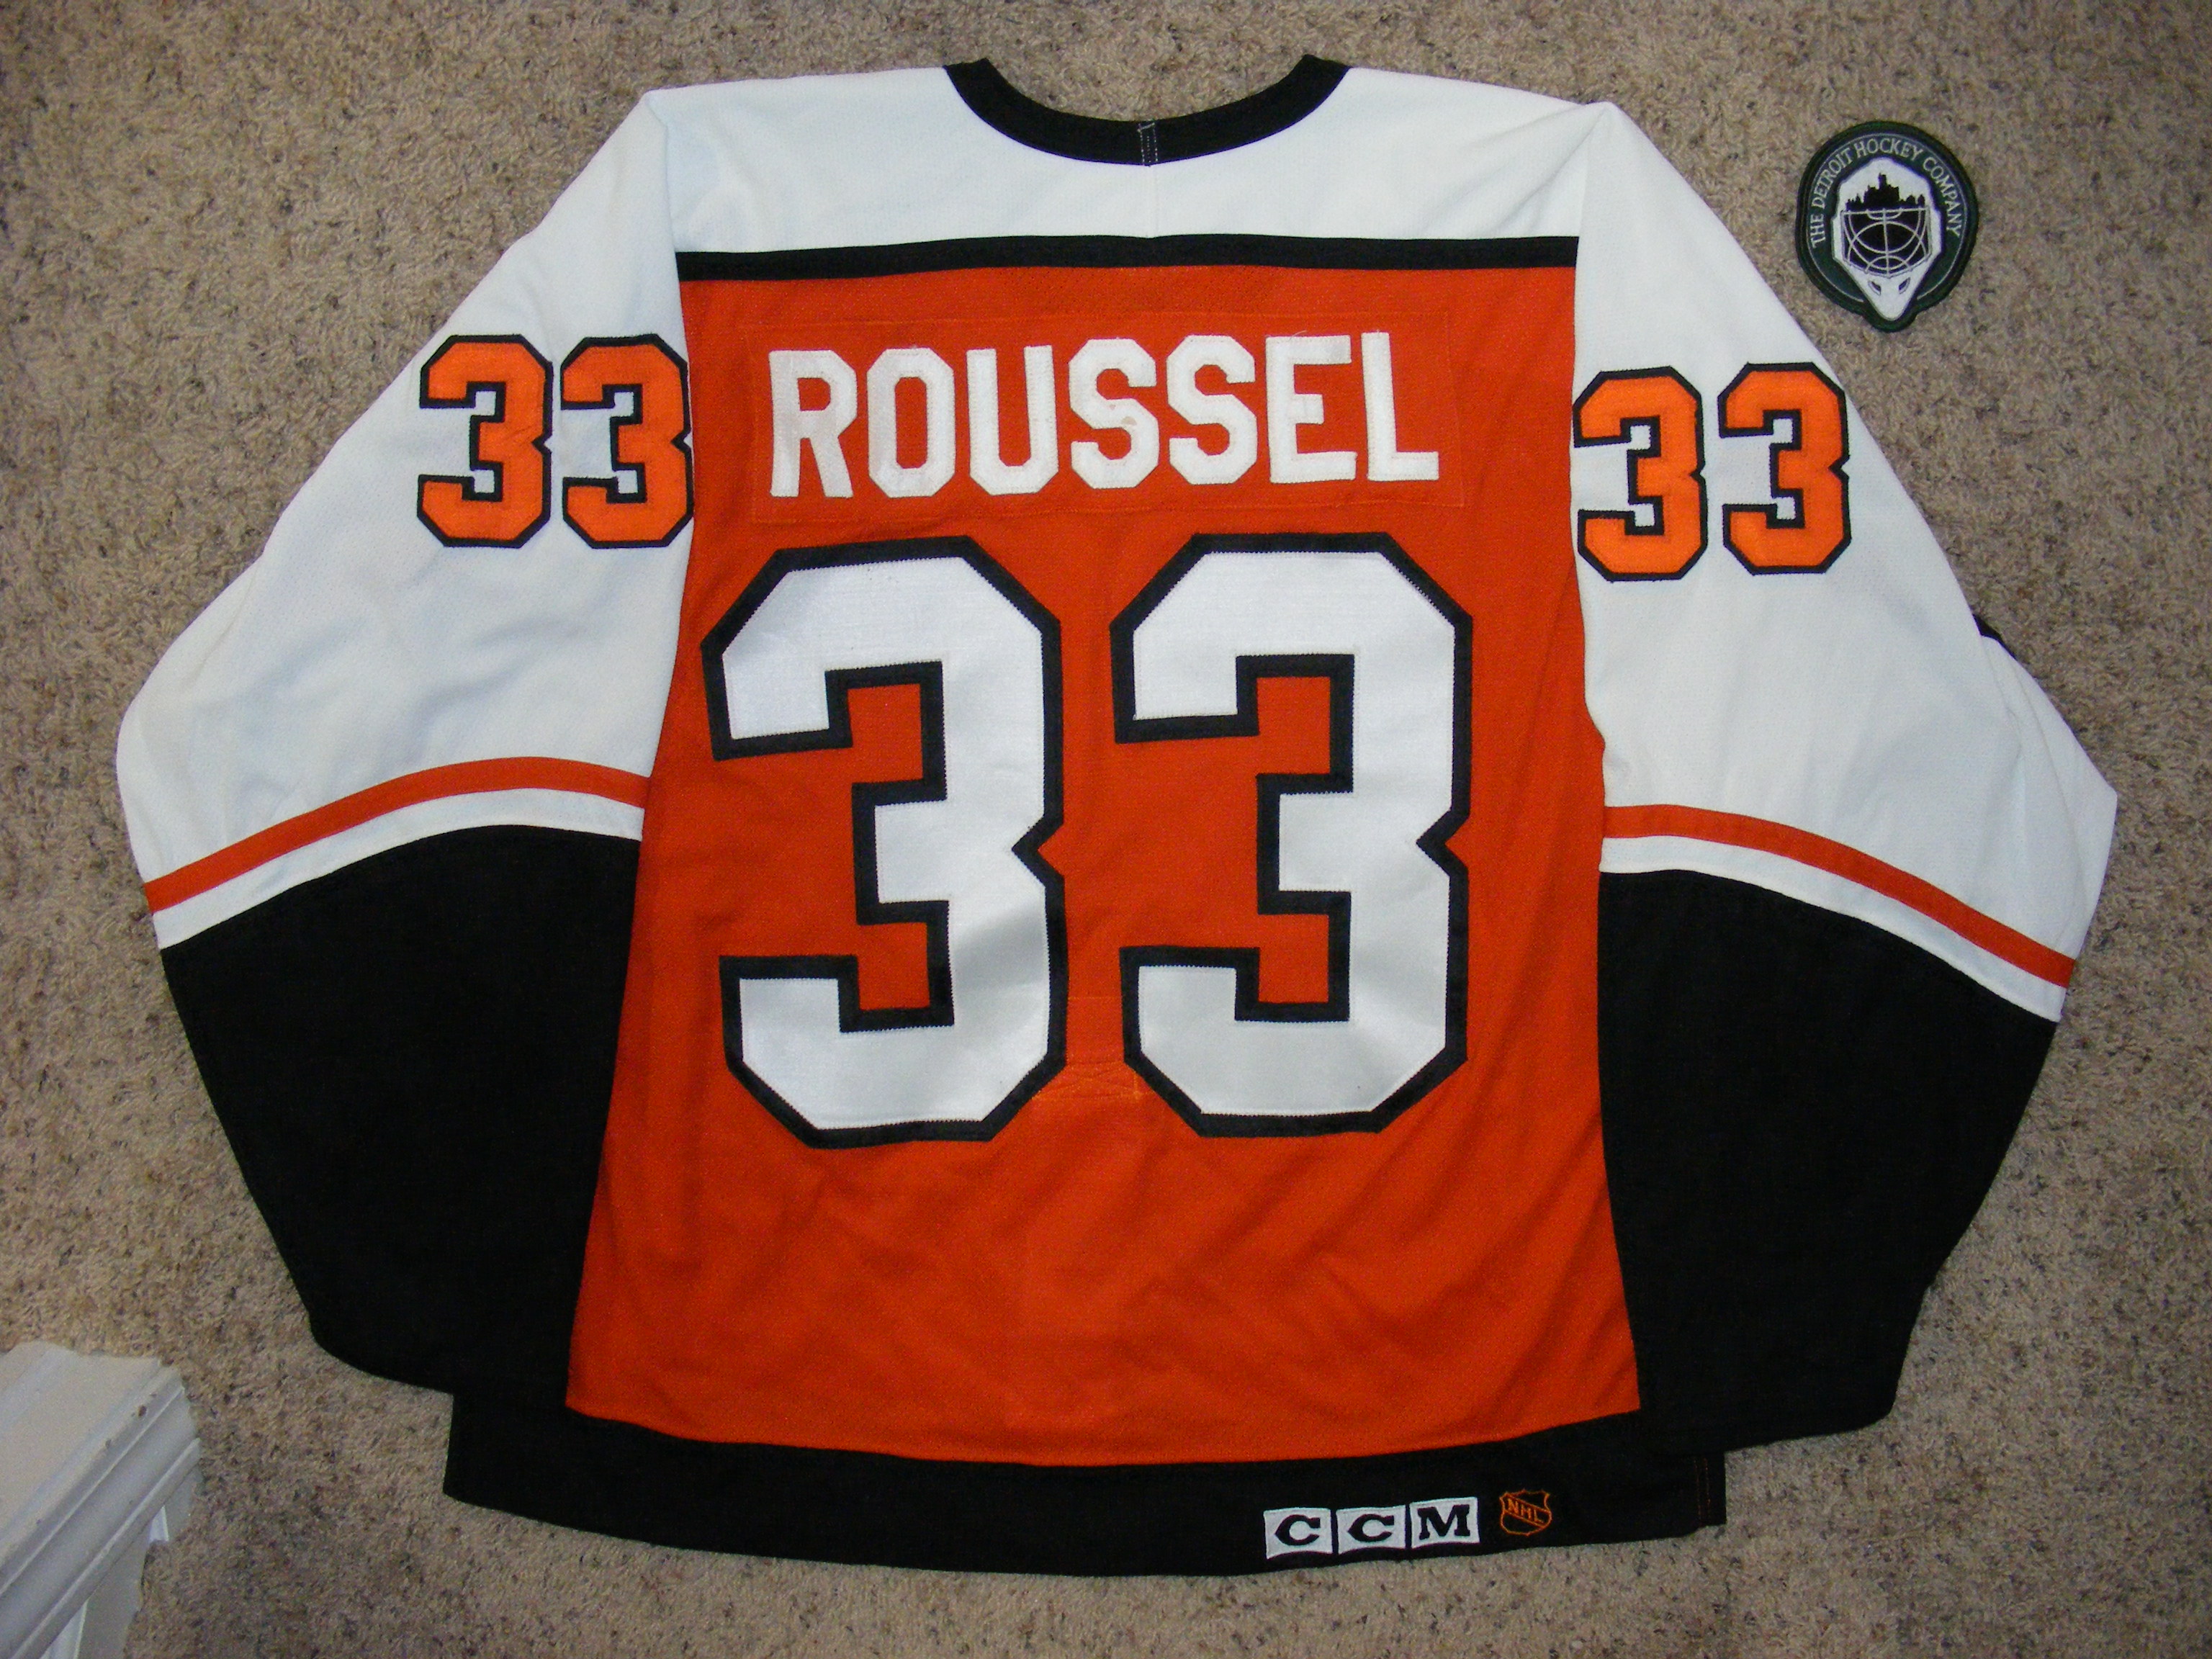 roussel jersey